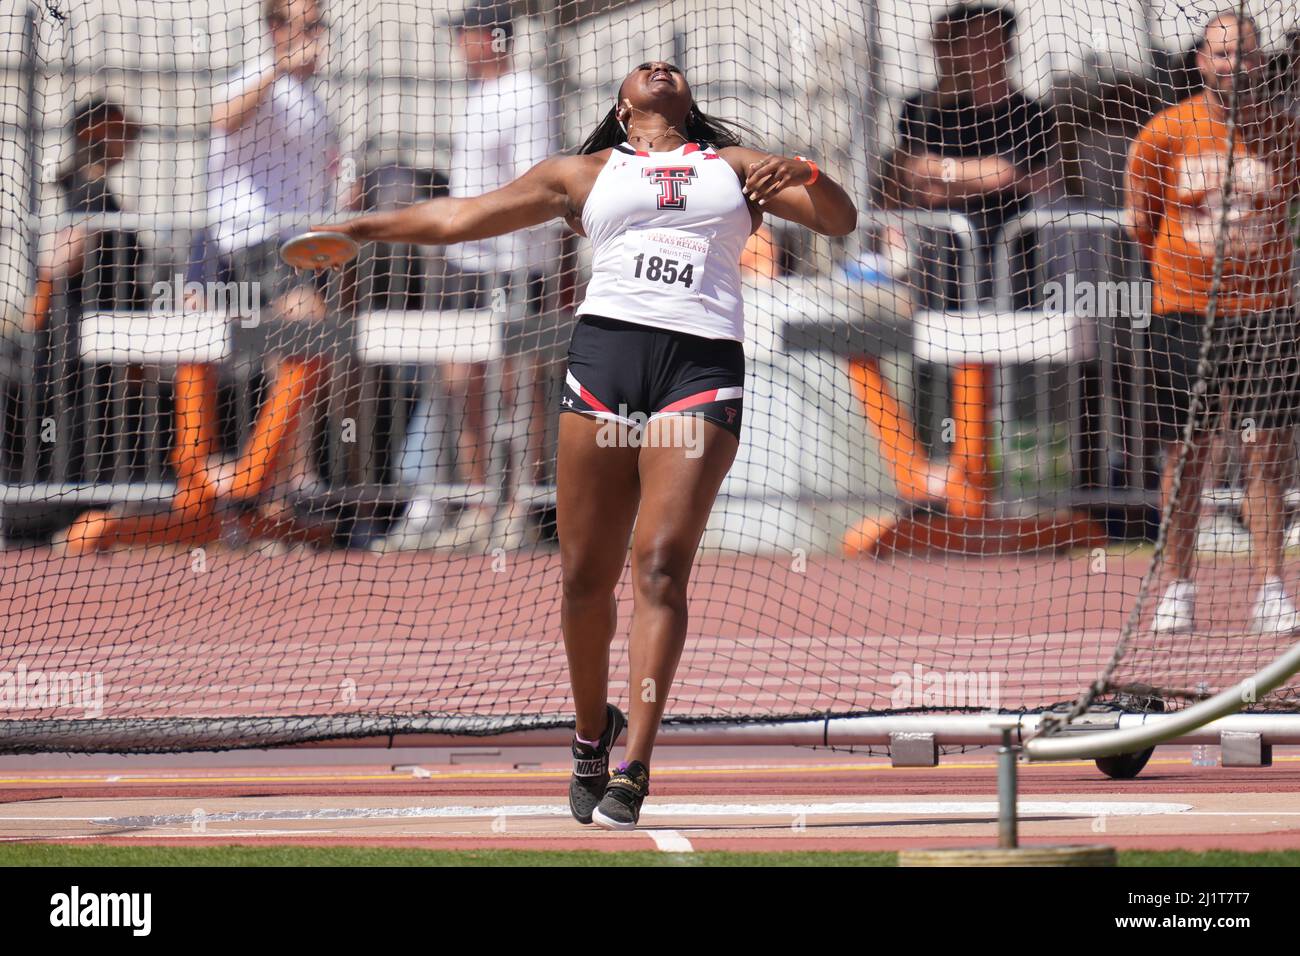 Seasons Usual of Texas Tech wins the women's discus with a throw of 190-7 (58.10m) during the 94th Clyde Littlefield Texas Relays, Saturday, Mar. 26, Stock Photo